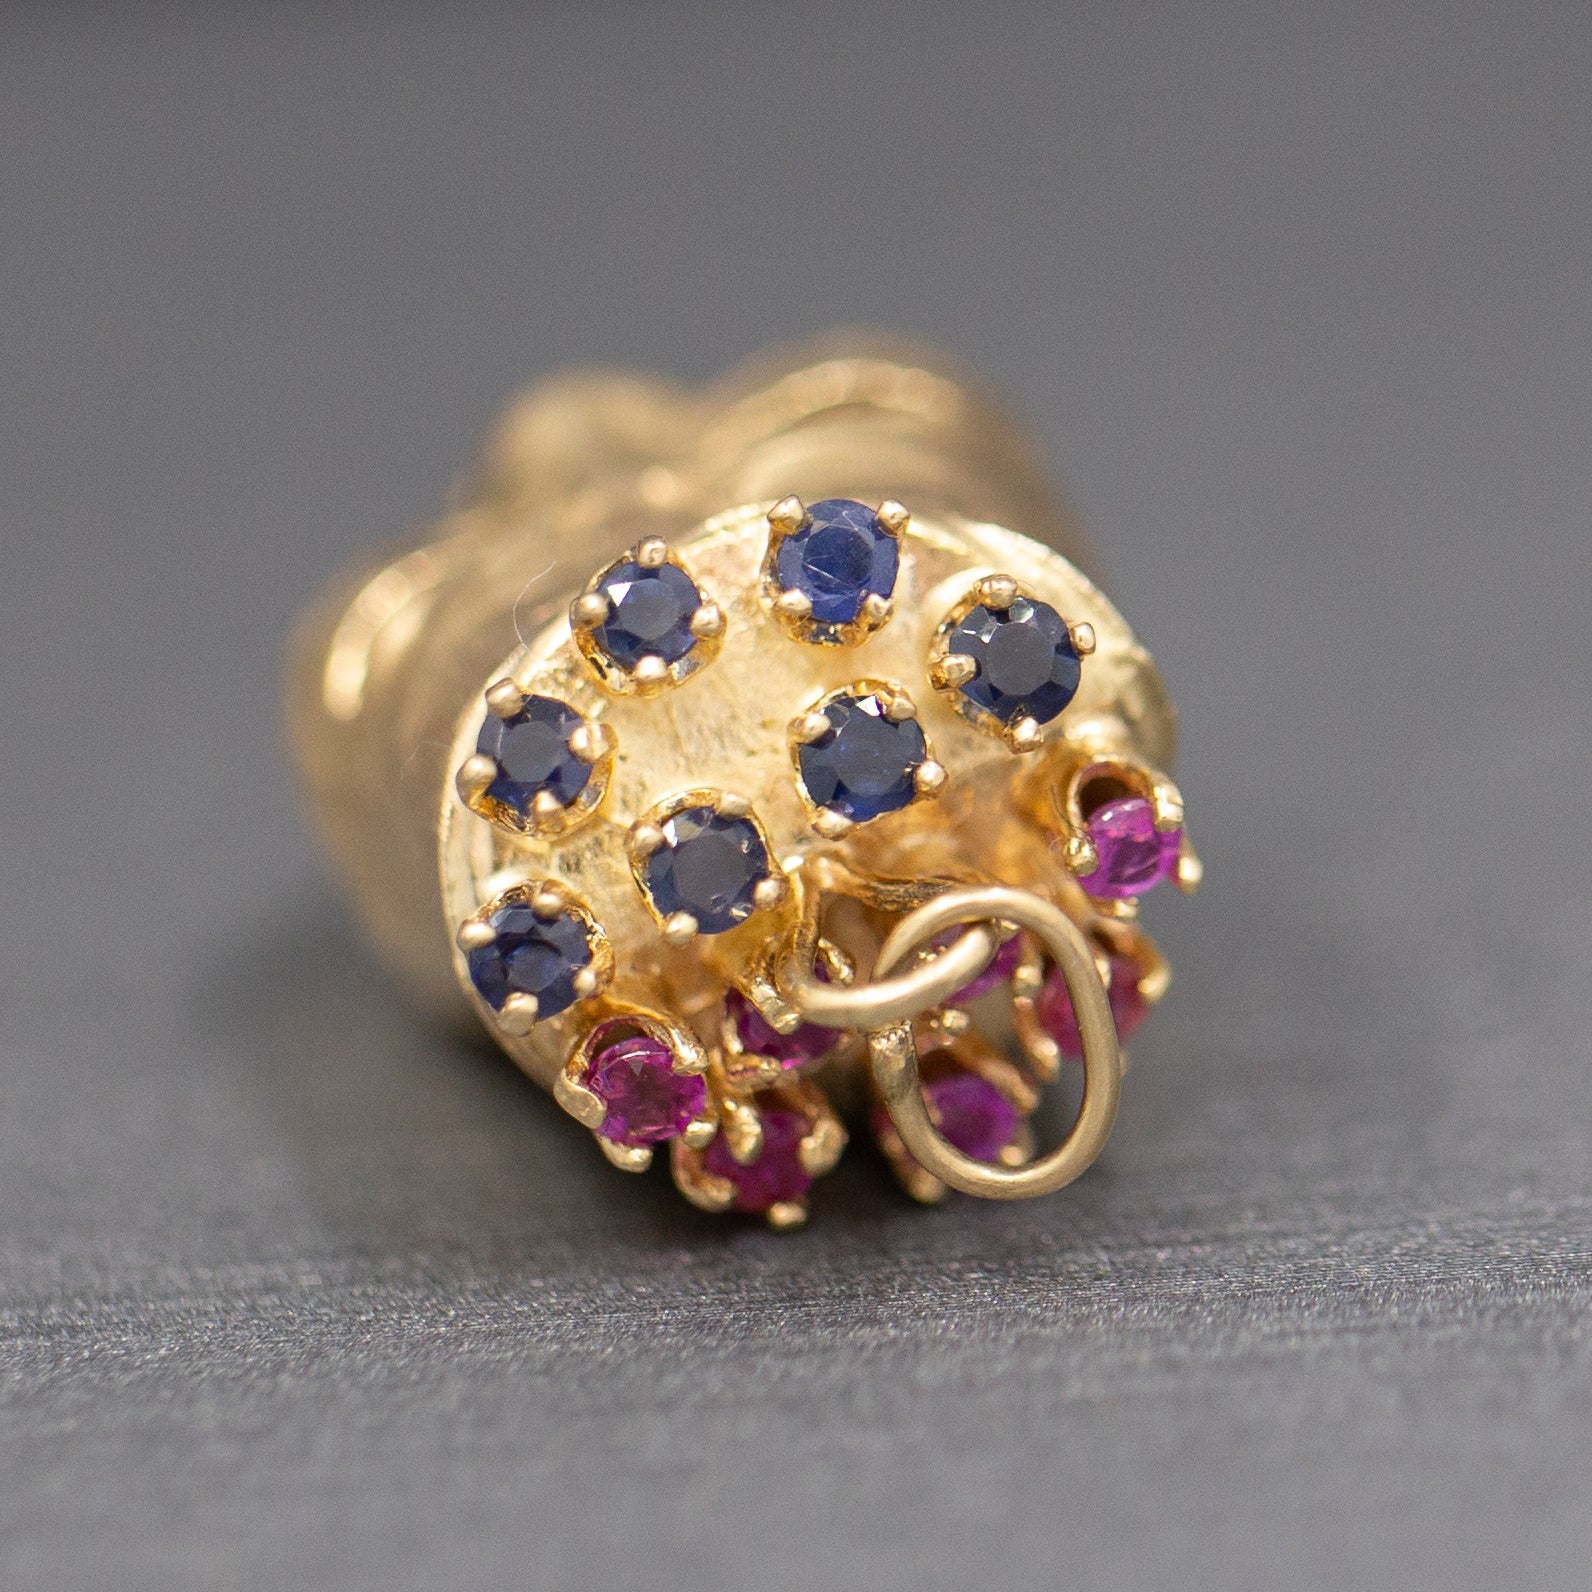 Fantastic Large Theatre Happy and Sad Face Double Sided Pendant Charm with Rubies and Sapphires in 14k Yellow Gold